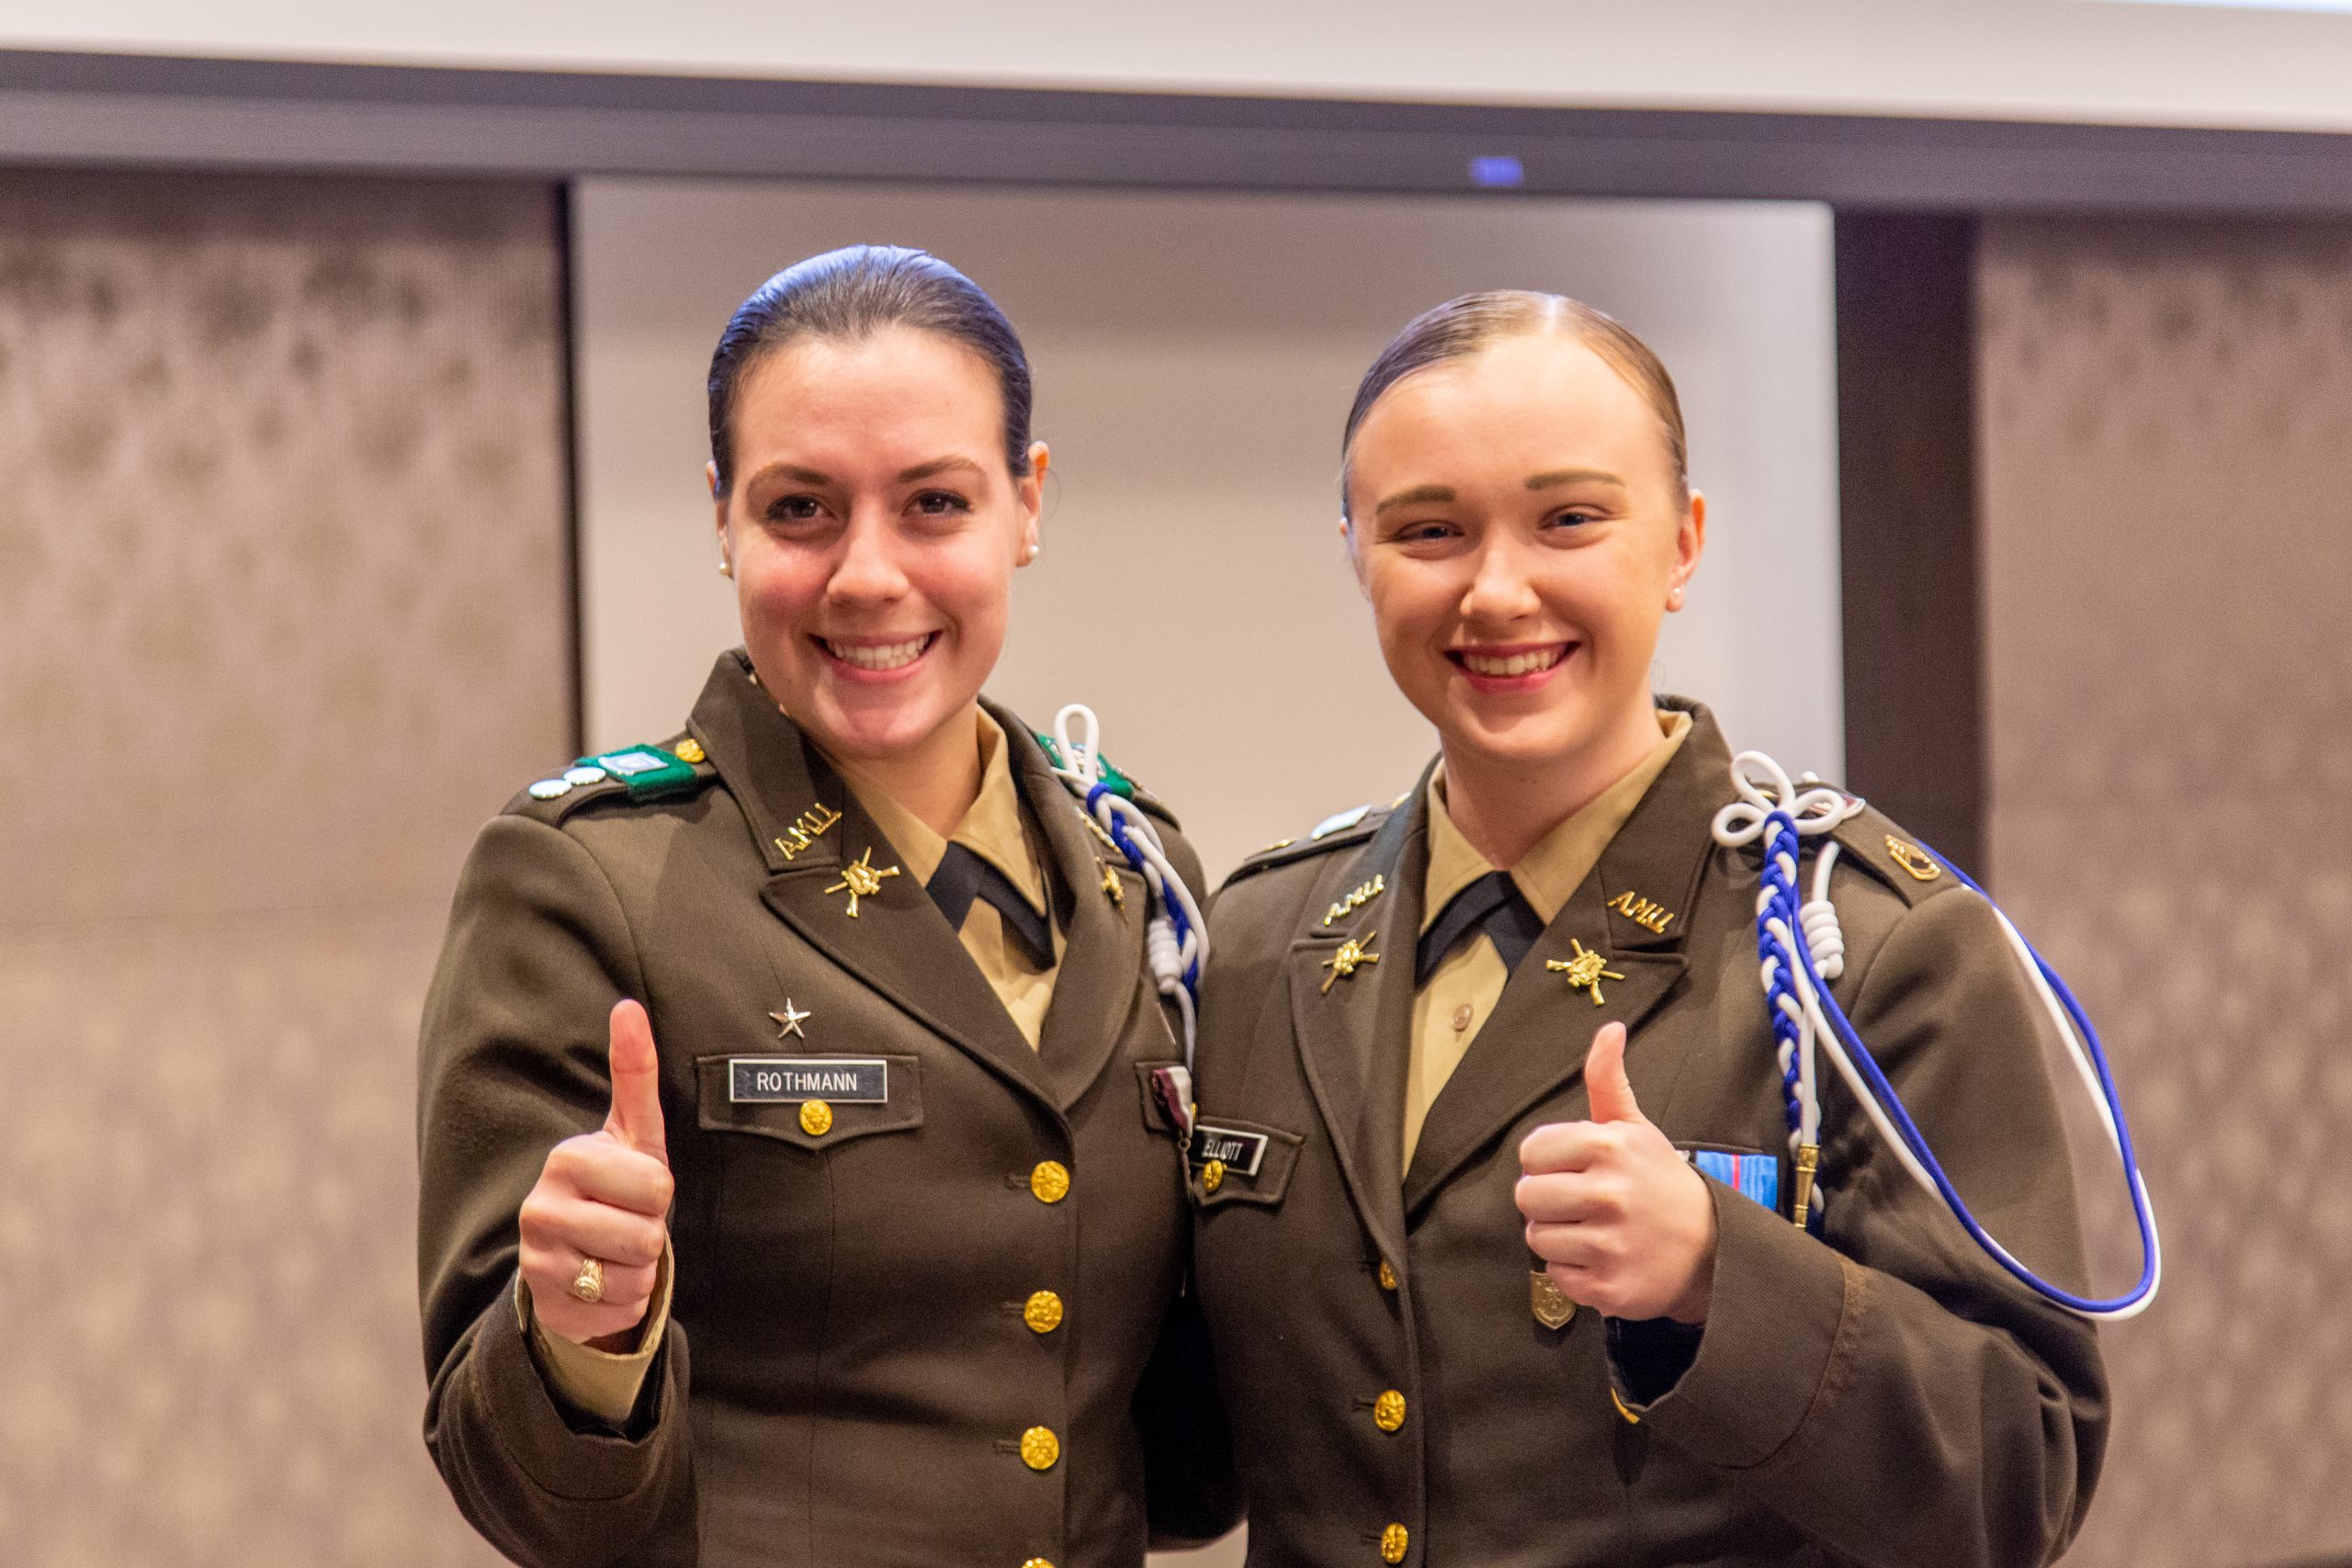 Two cadets at O.R. Simpson Honor Society Induction Ceremony